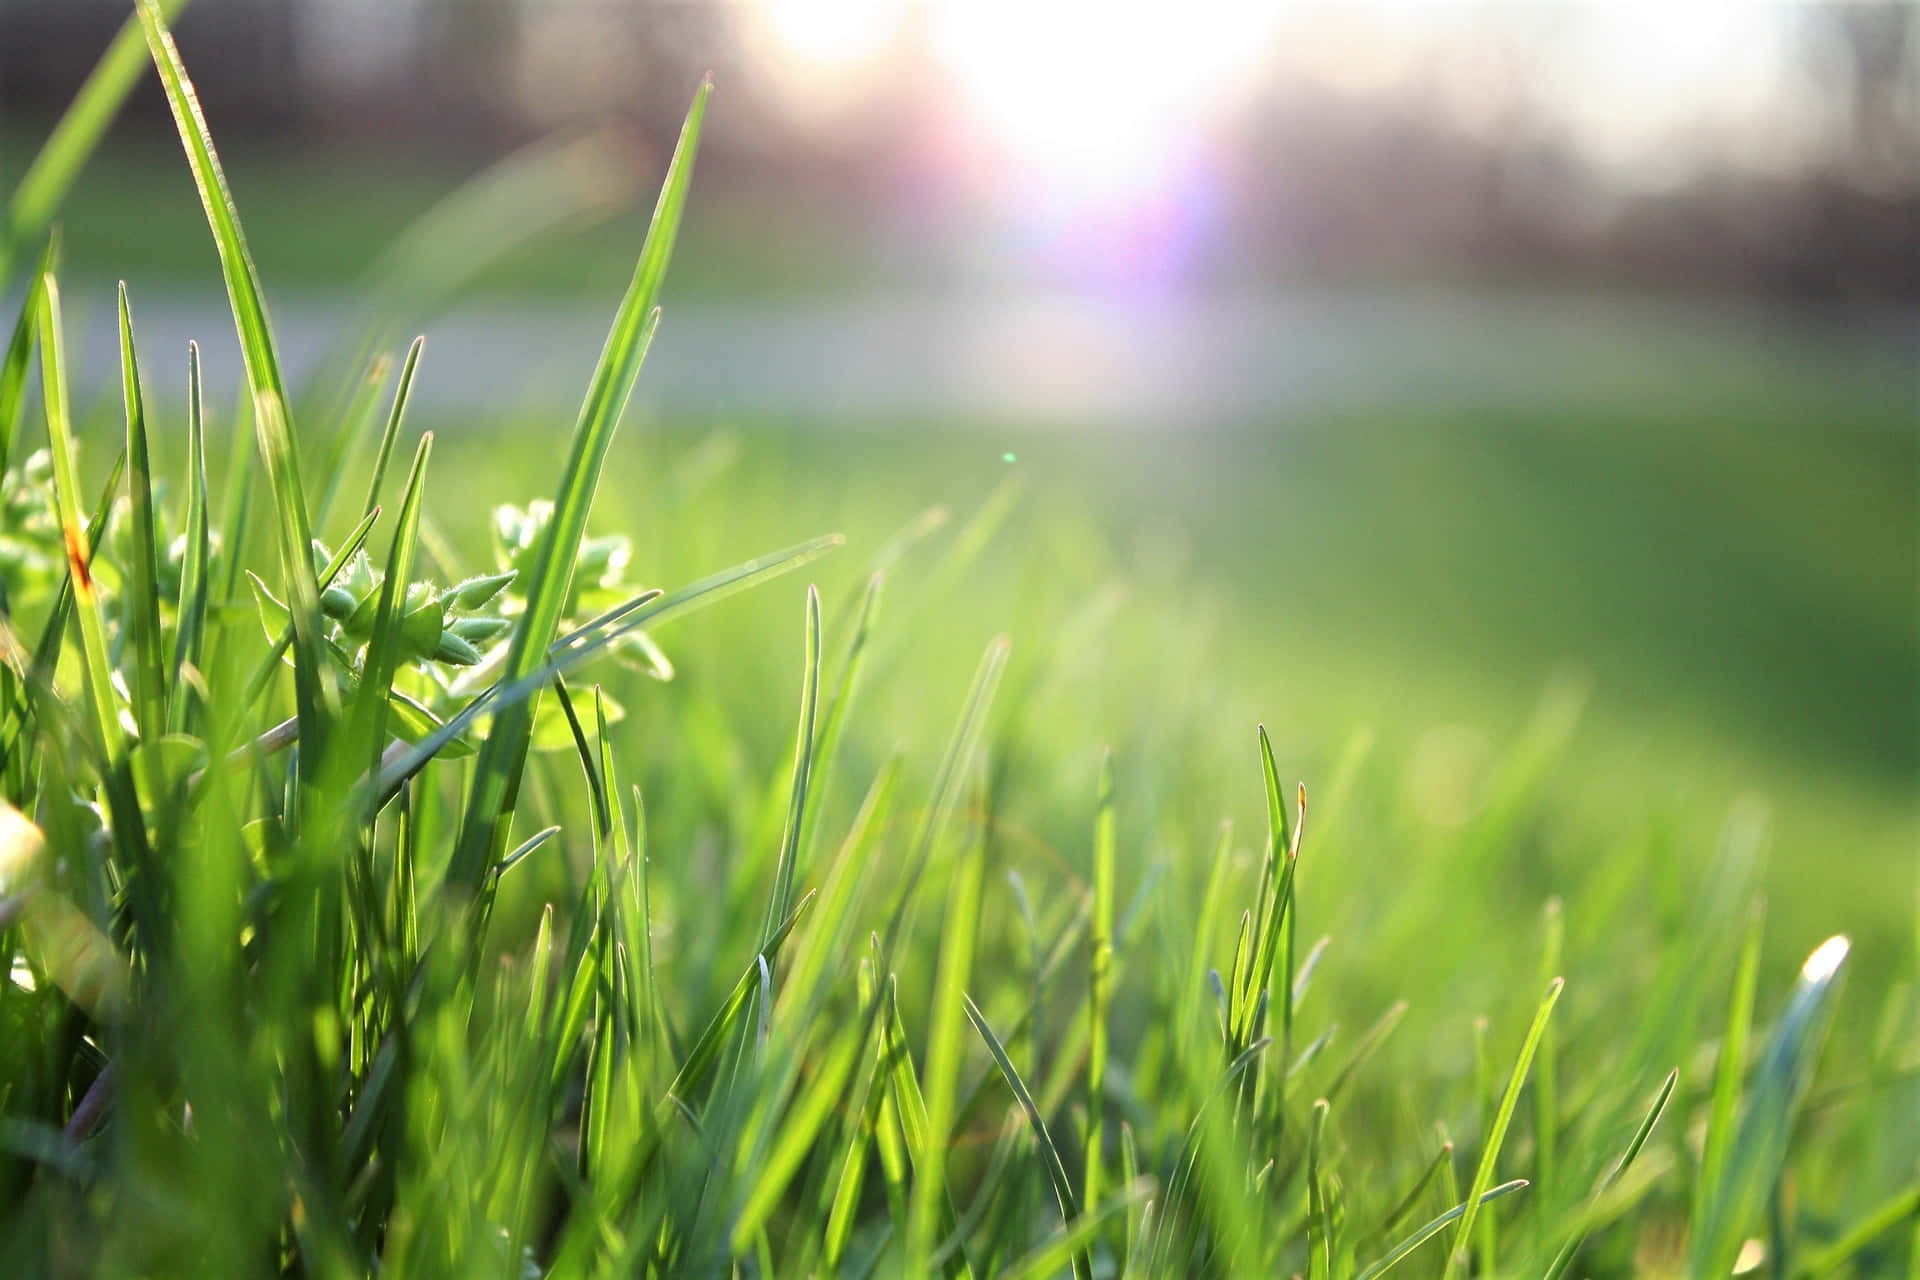 The beauty of nature can be seen and felt with grass.